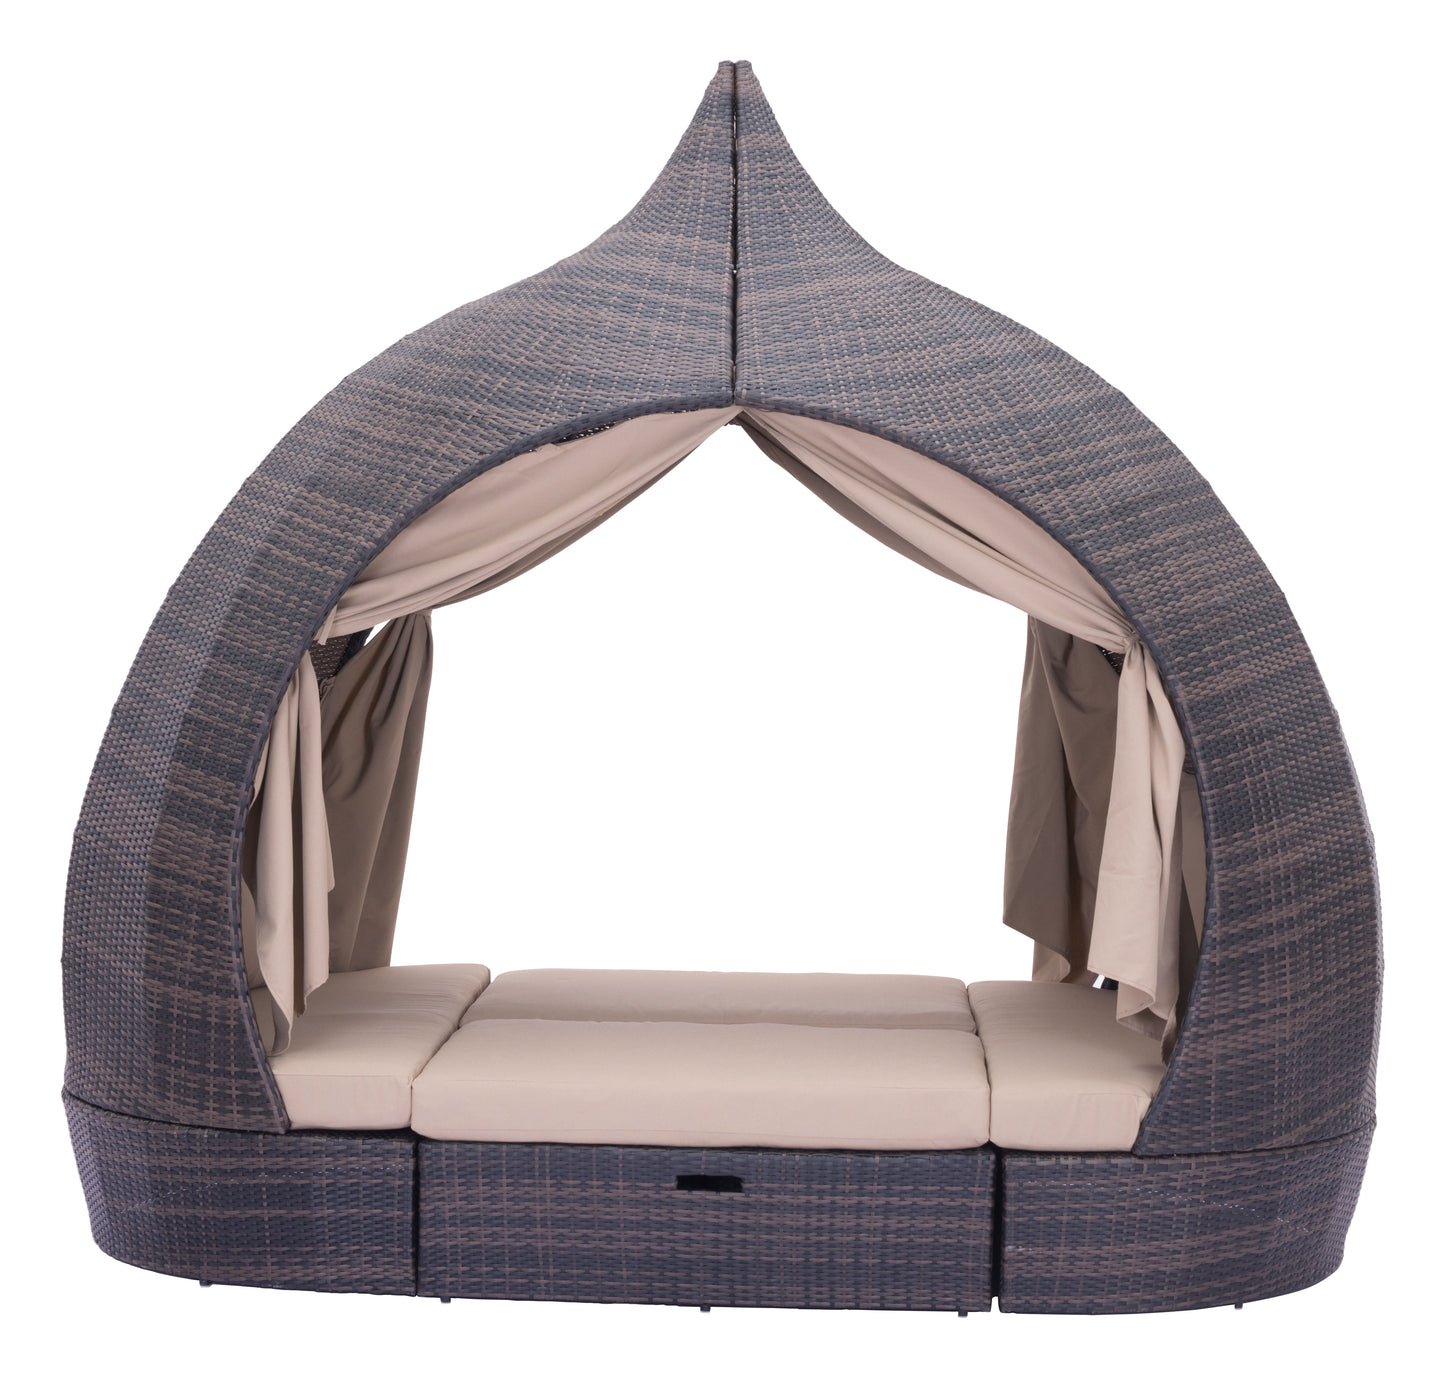 Majorca Daybed